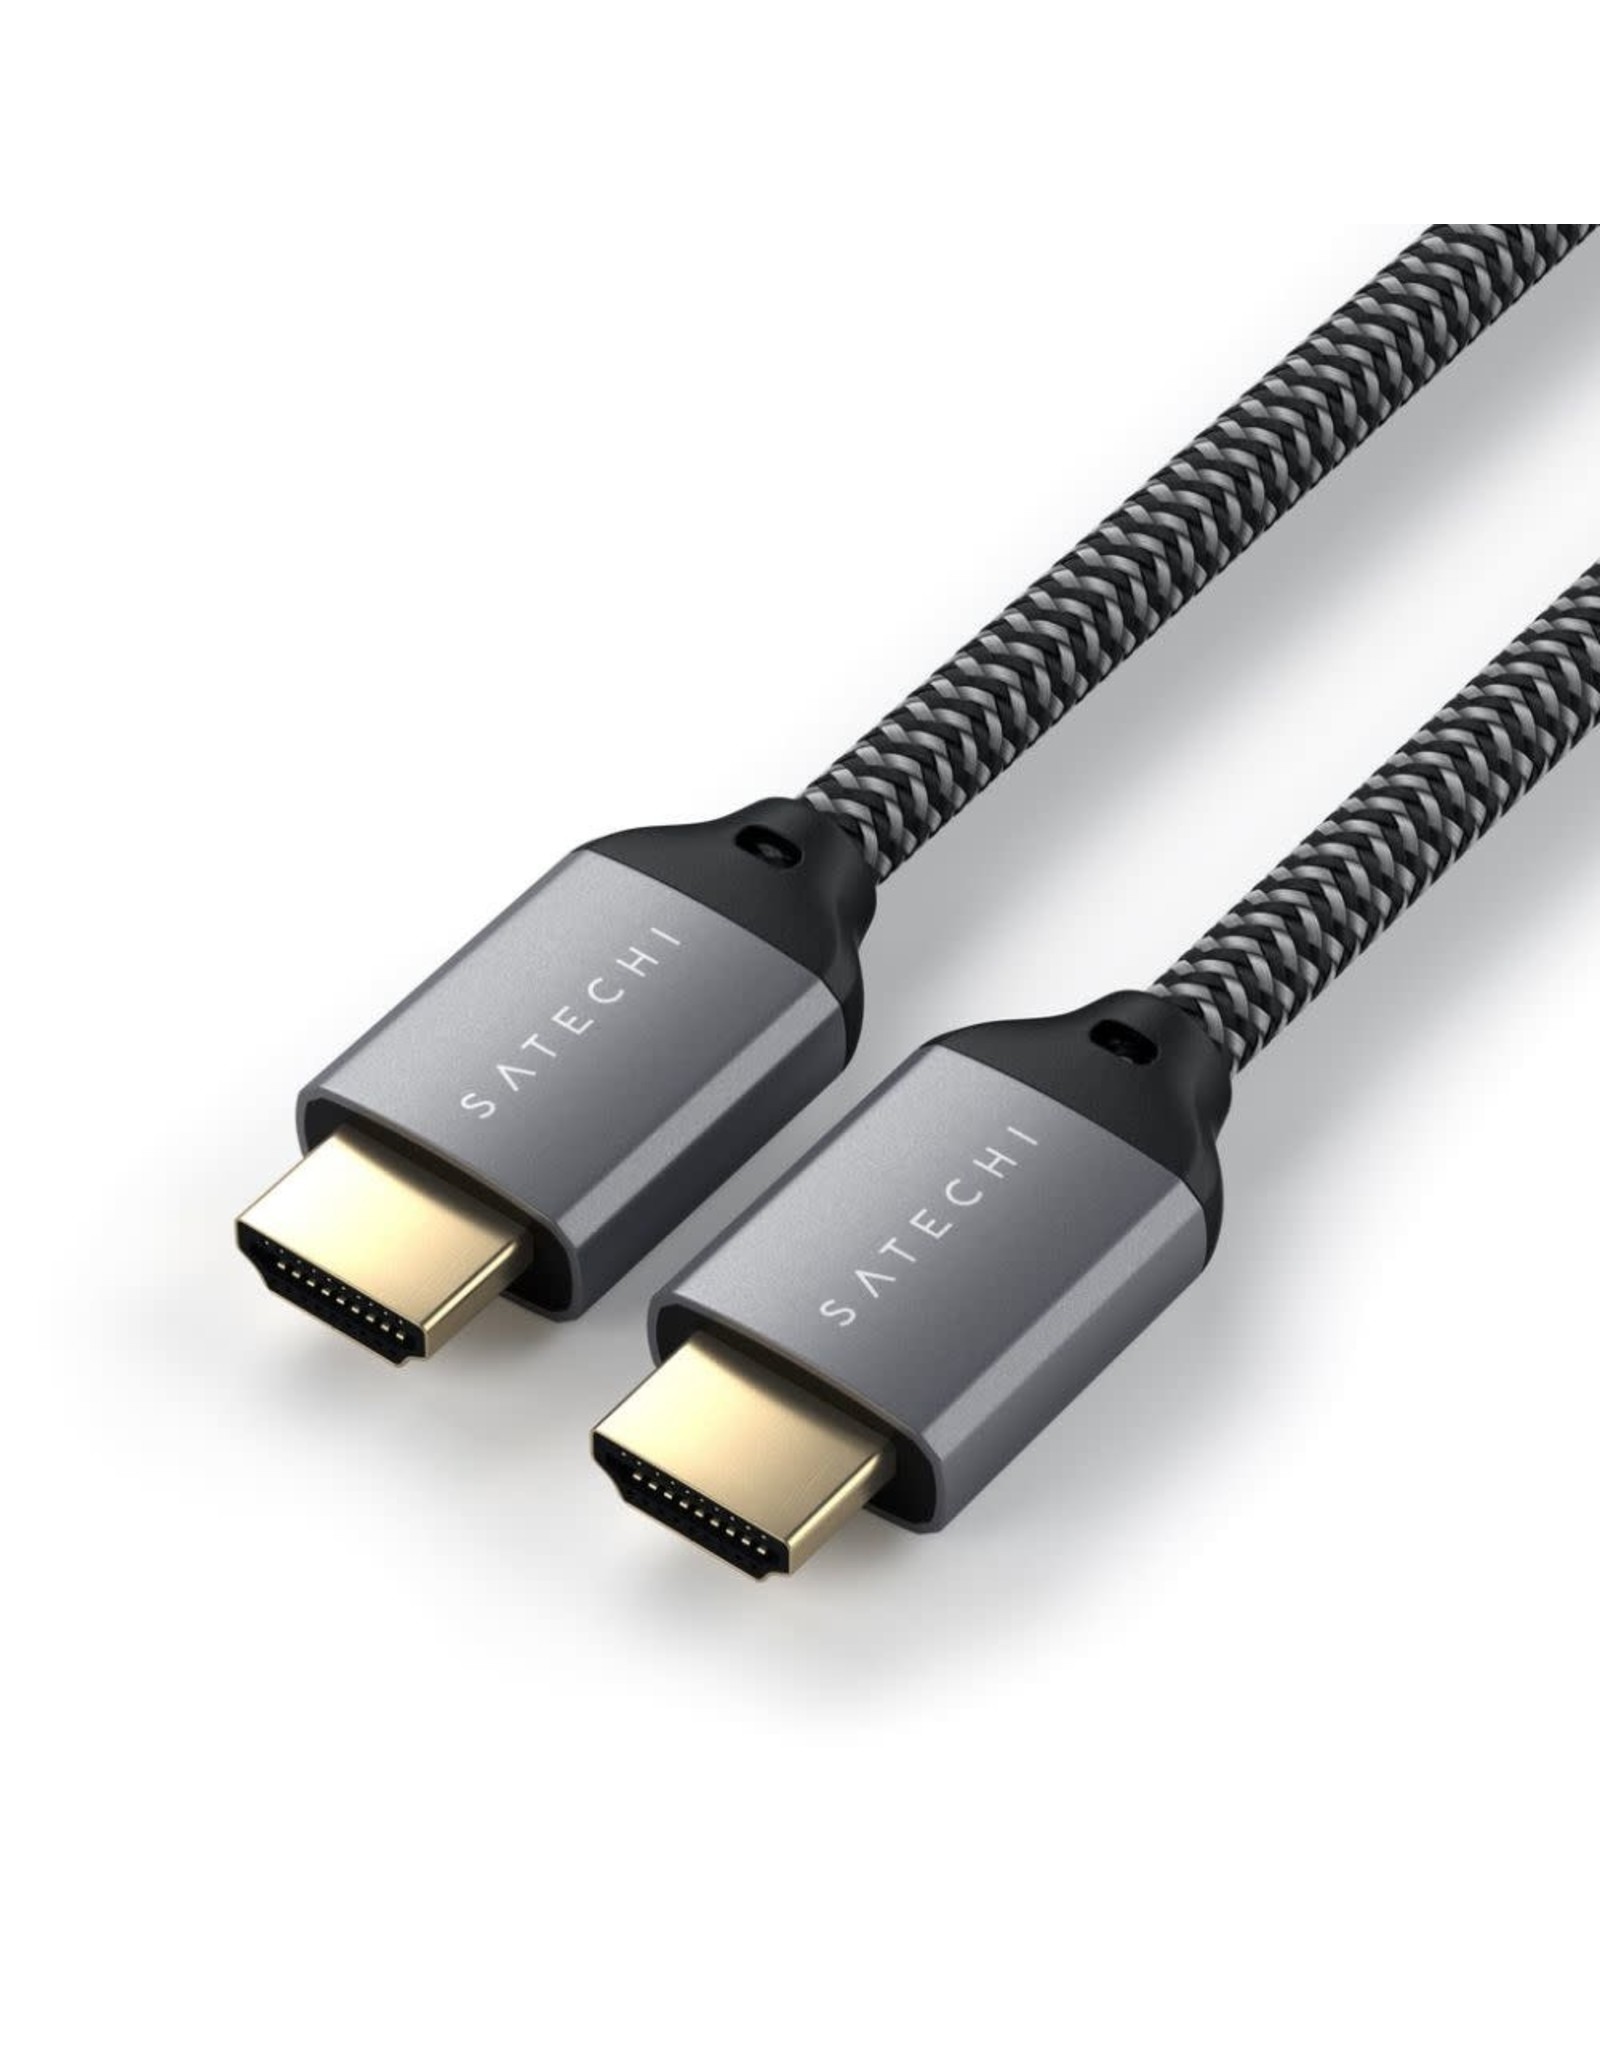 Satechi Satechi 8K Ultra High Speed HDMI Cable supports 8K @ 60 Hz and 4K @ 120Hz - 2m